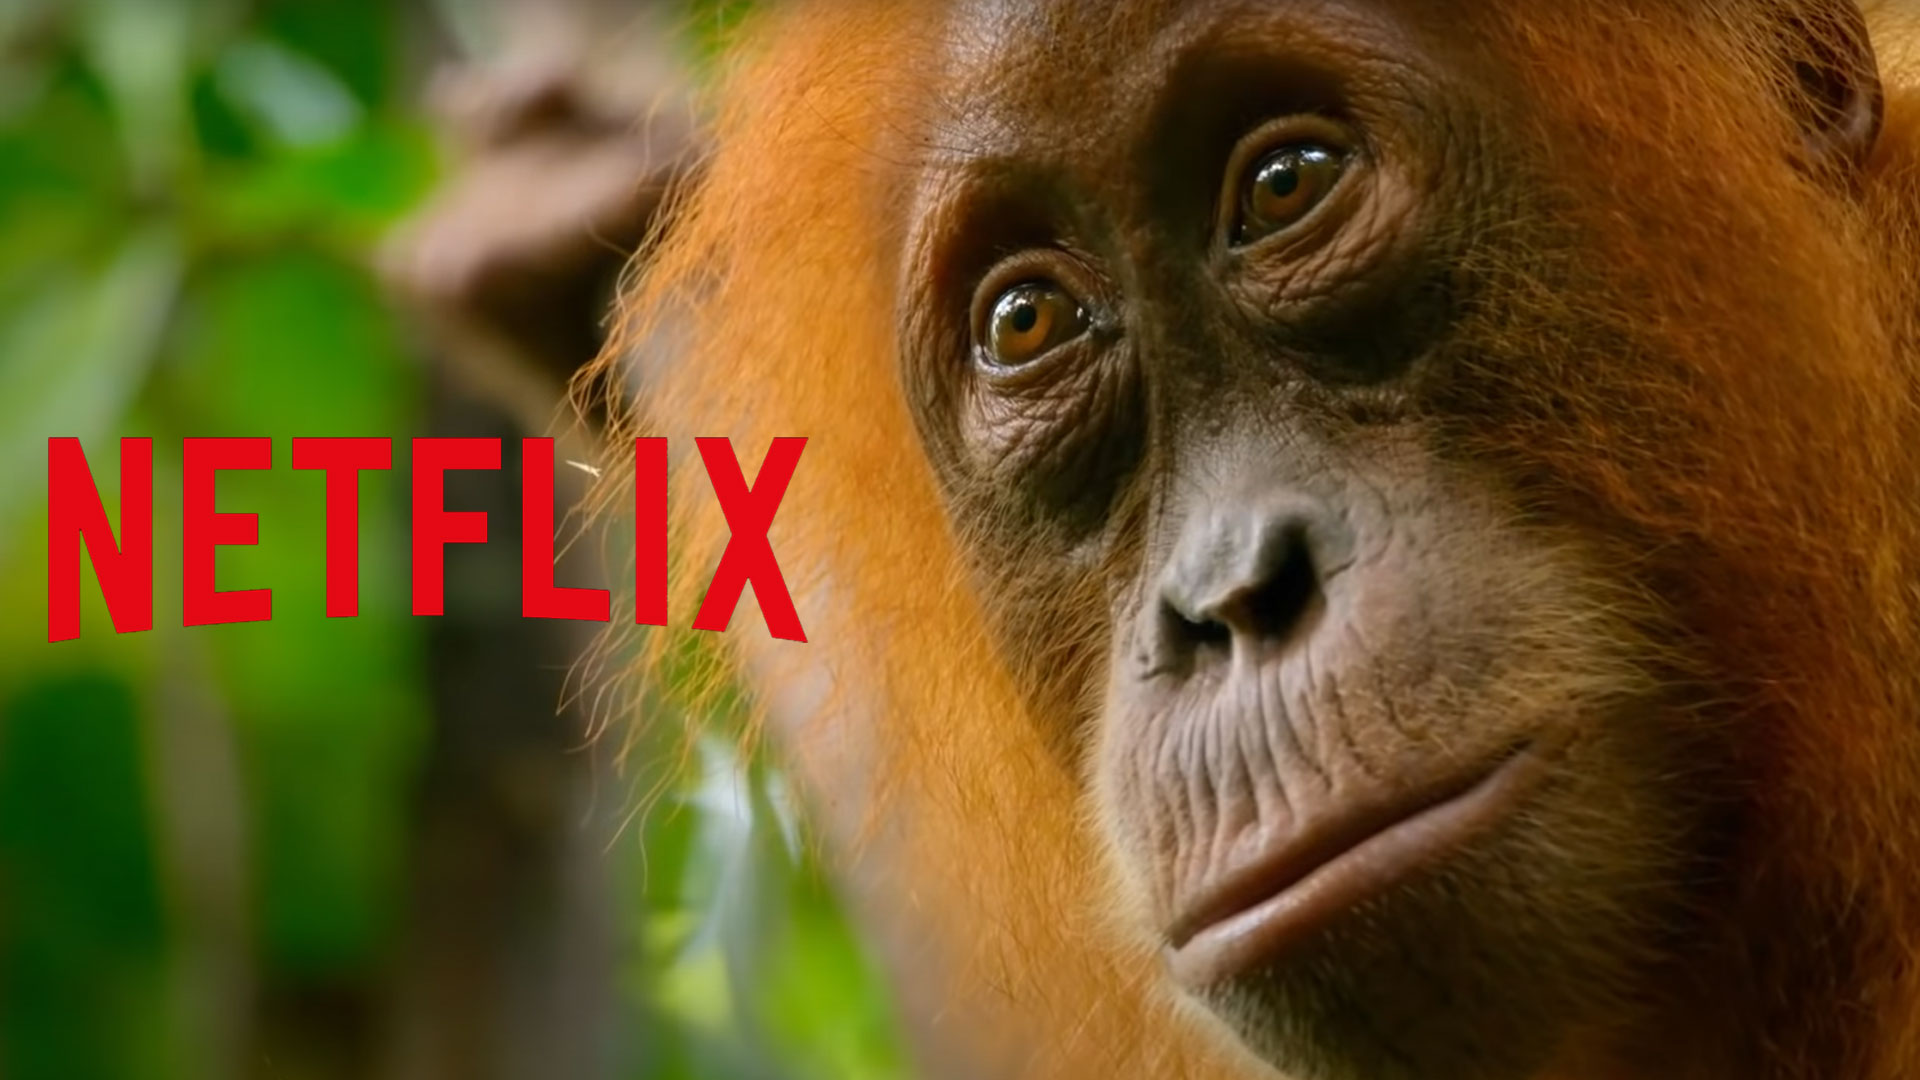 At Home Netflix Has Just Put A Bunch Of Documentaries Up On YouTube For Free 1 - WSFM